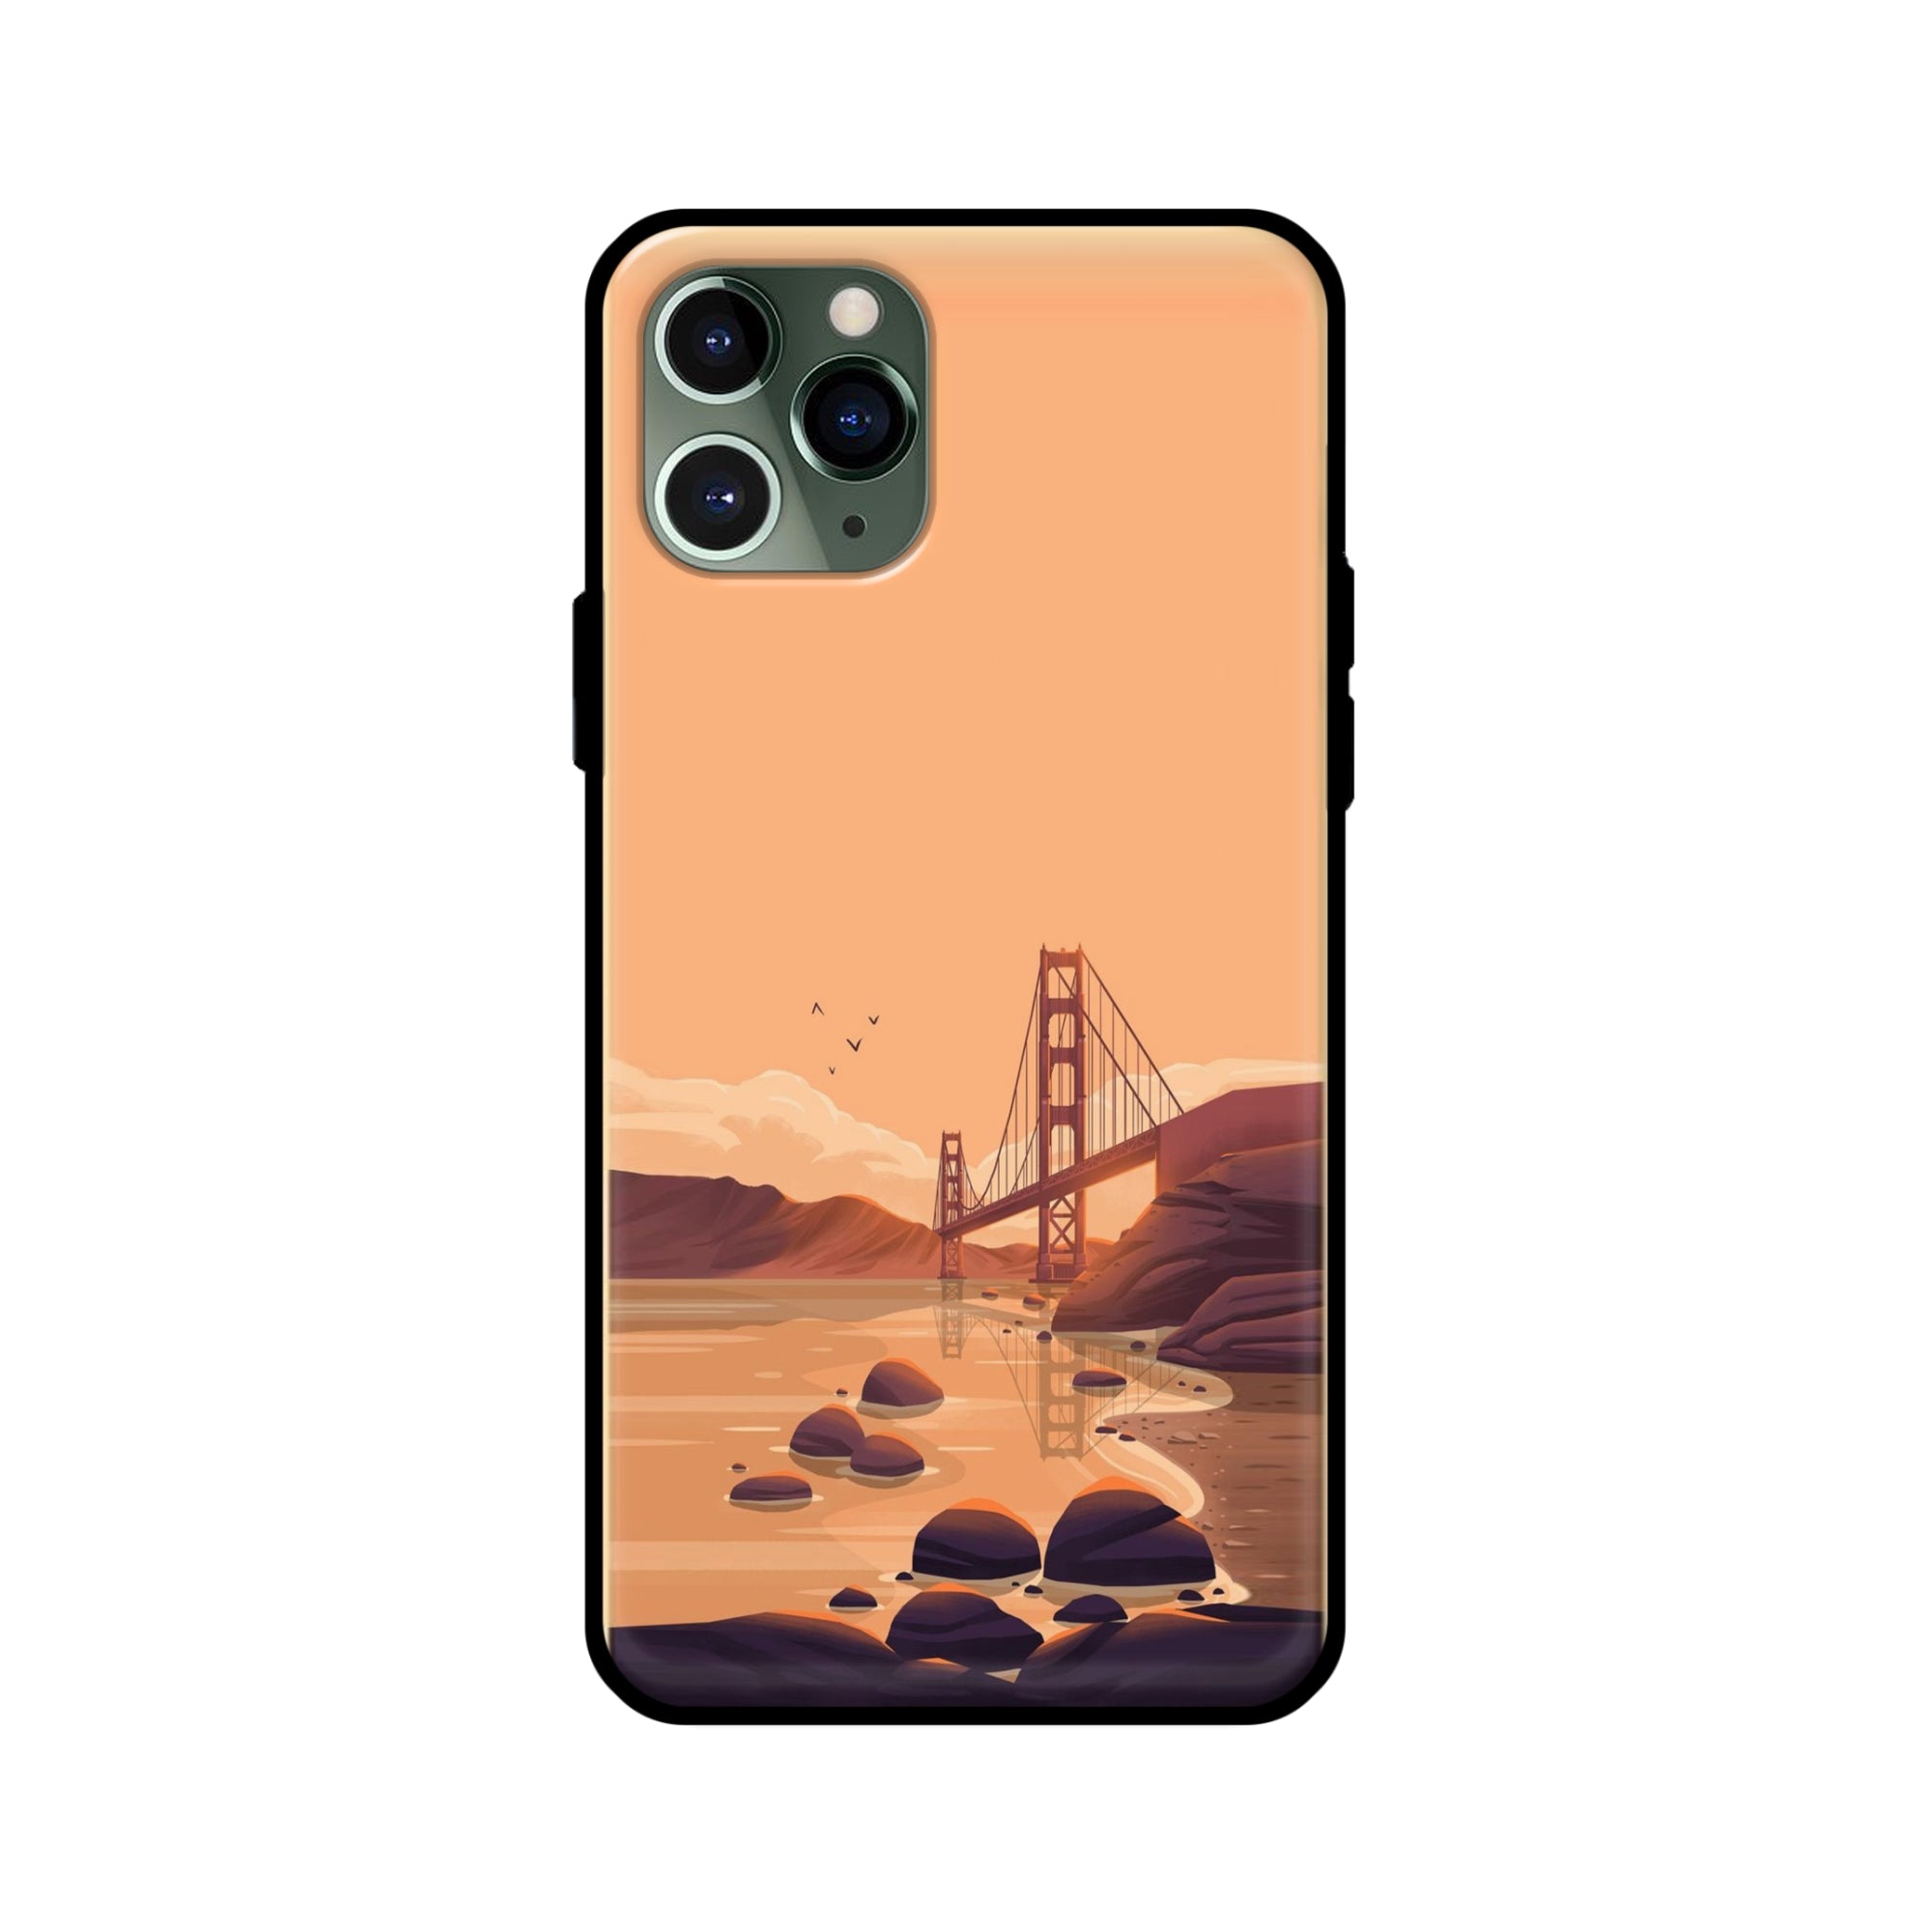 Buy San Fransisco Glass/Metal Back Mobile Phone Case/Cover For iPhone 11 Pro Online